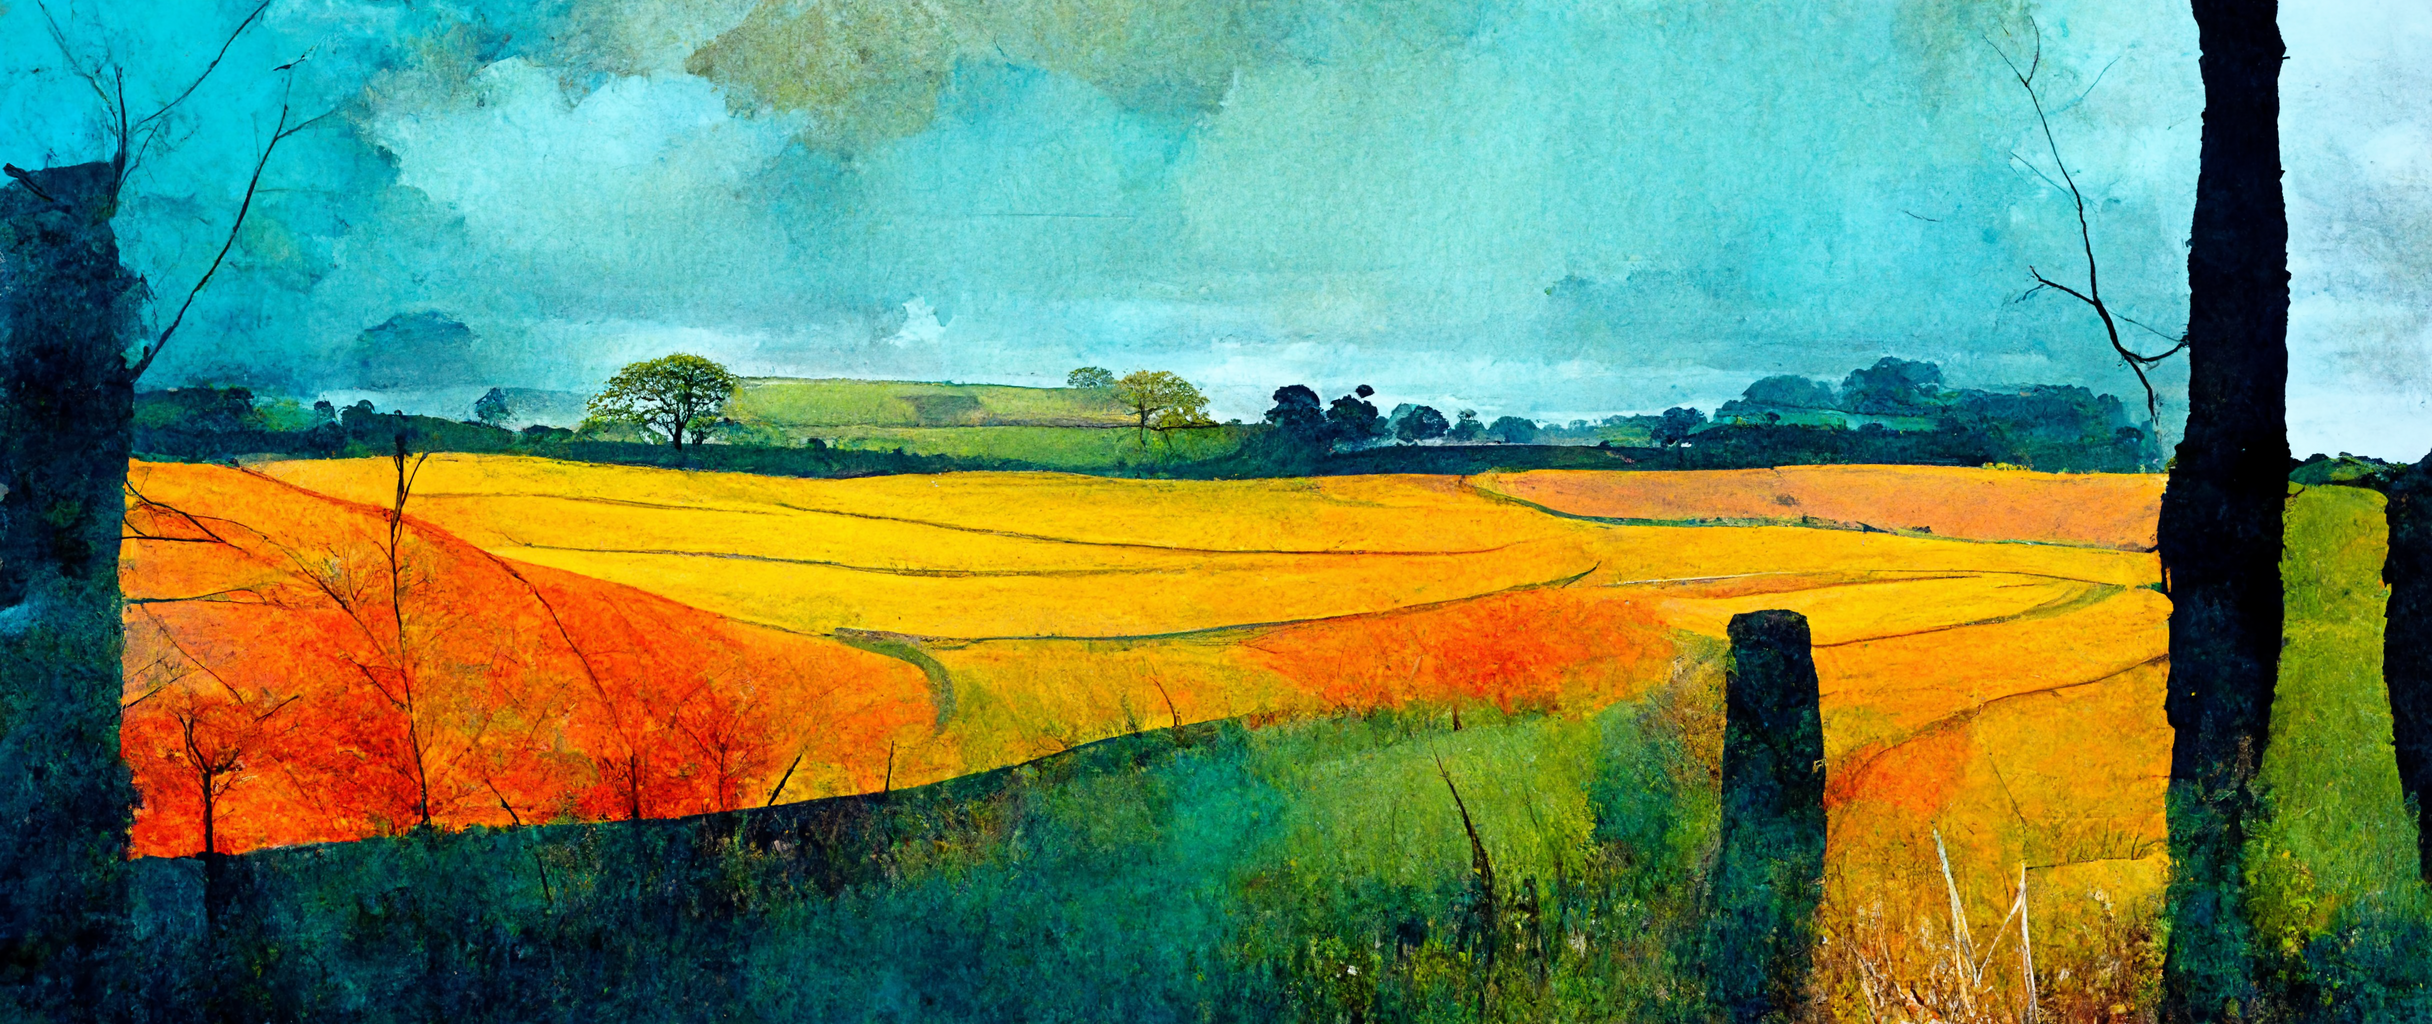 vibe_lesley_seeger_british_countryside_fields_landscape_477f7797-af93-4193-9f42-5840bb42abcb